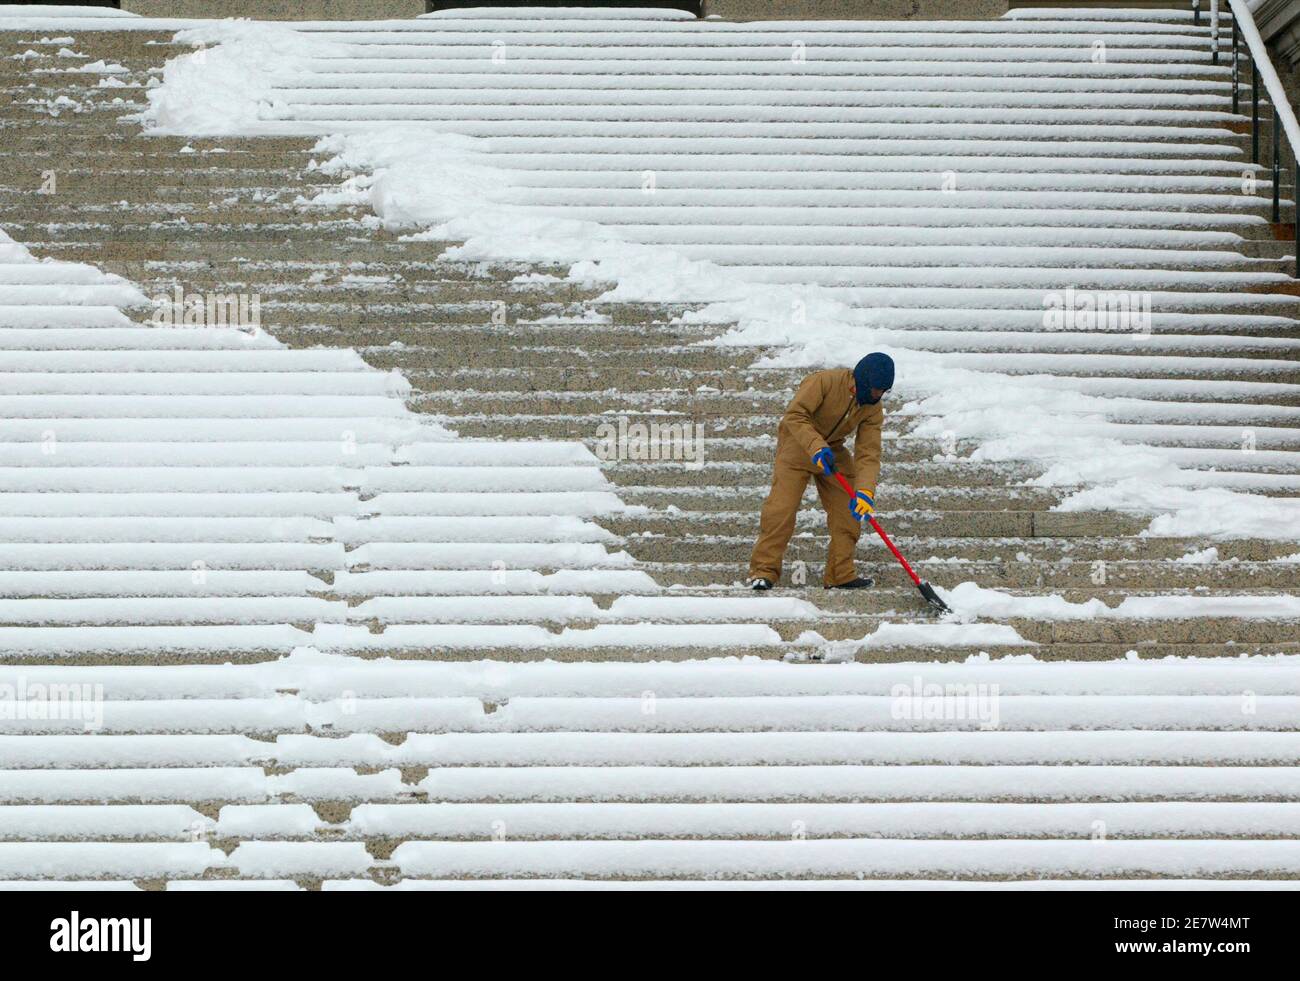 Willie Simmons shovels the numerous steps of the National Archives after a major snowstorm hit the Washington area on February 12, 2006. Airports from Washington to Boston are shut down due to high, gusting winds and major accumulations of snow.        REUTERS/Gary Cameron Stock Photo